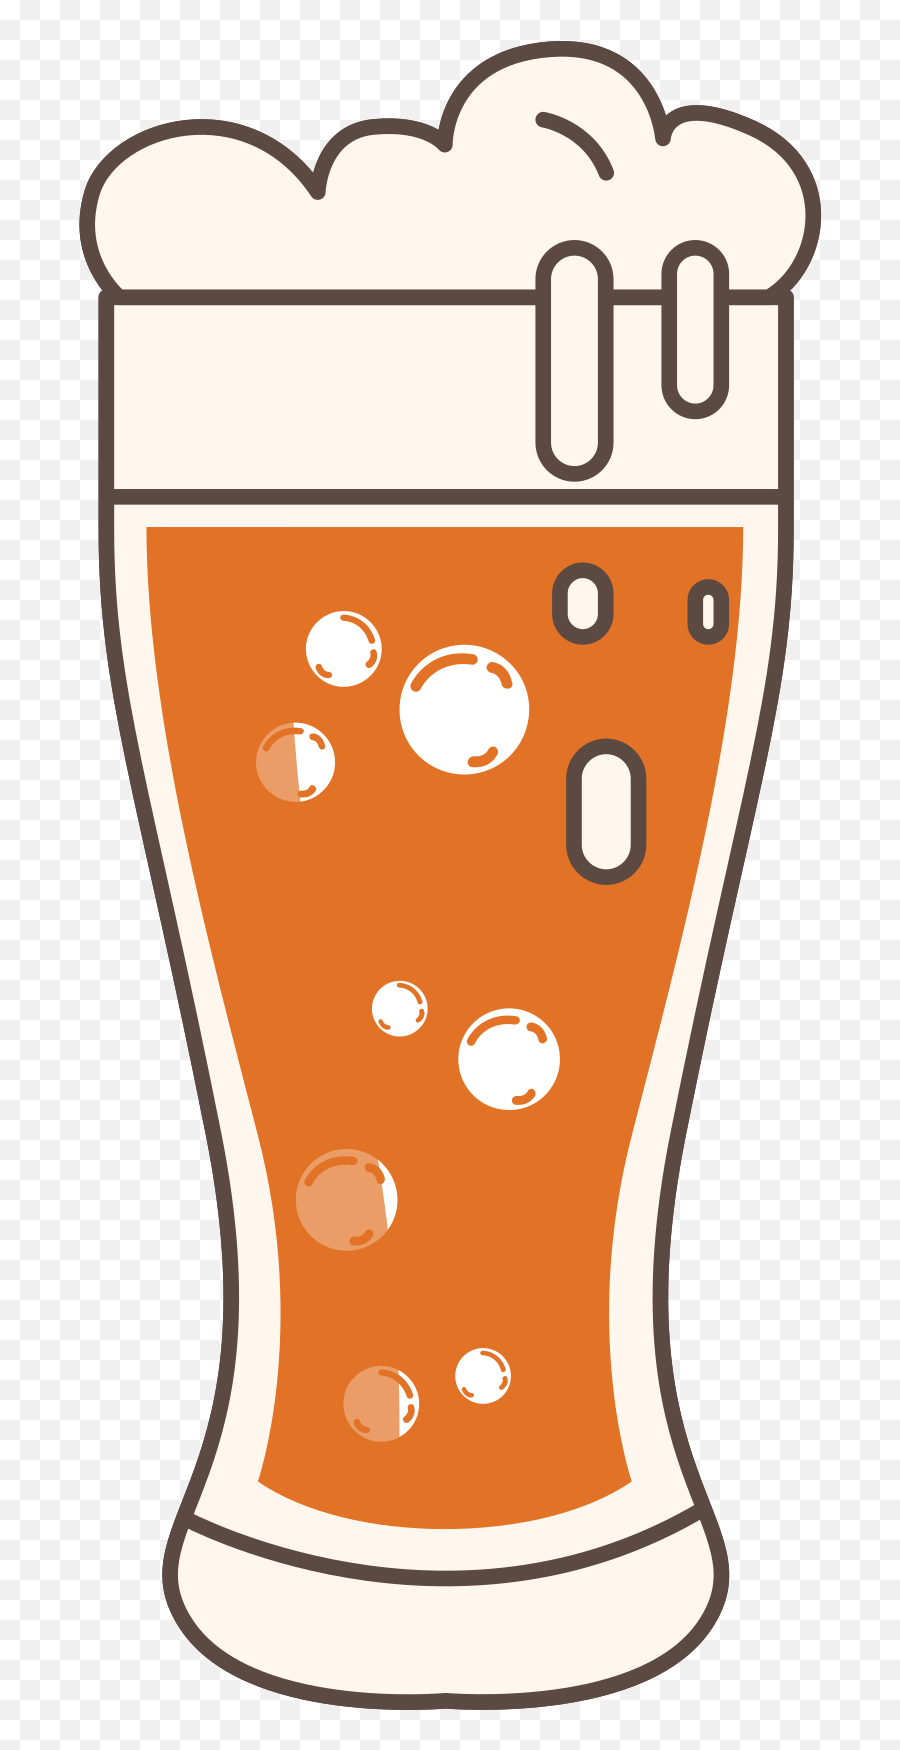 Free Beer Png With Transparent Background - Willibecher Emoji,Beer Transparent Background